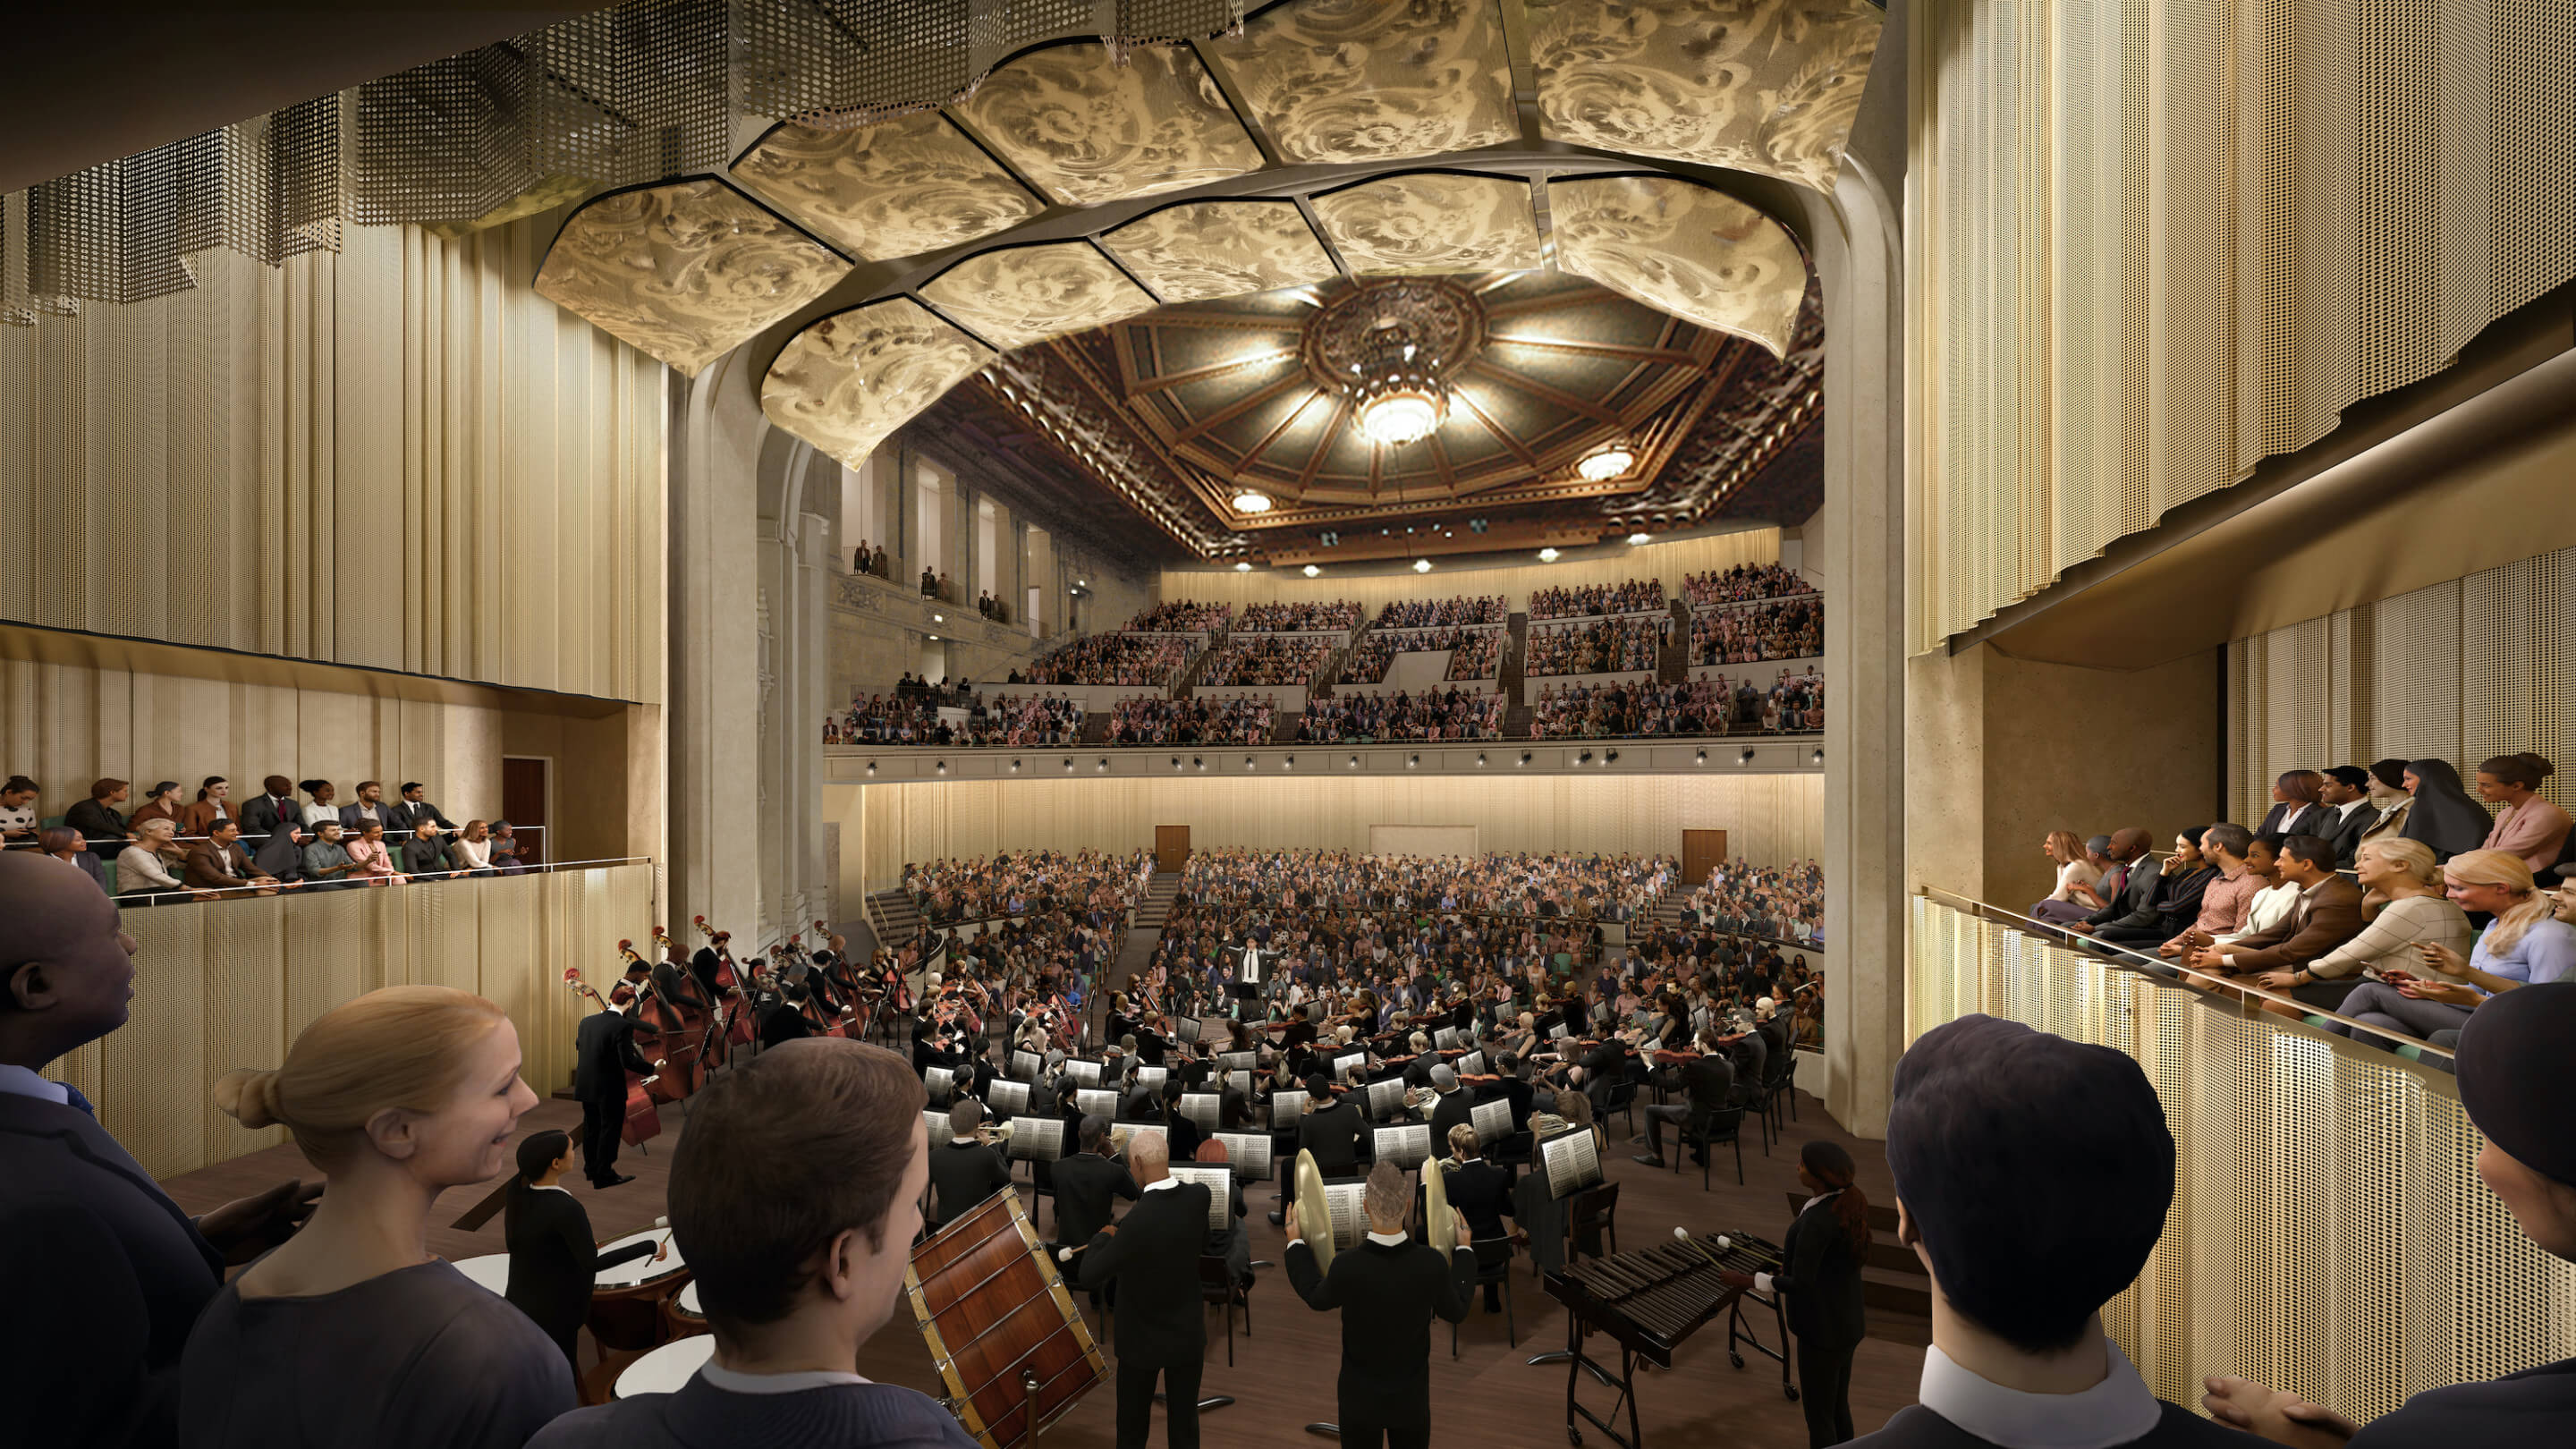 rendering of a renovated concert hall viewed from choral terrace